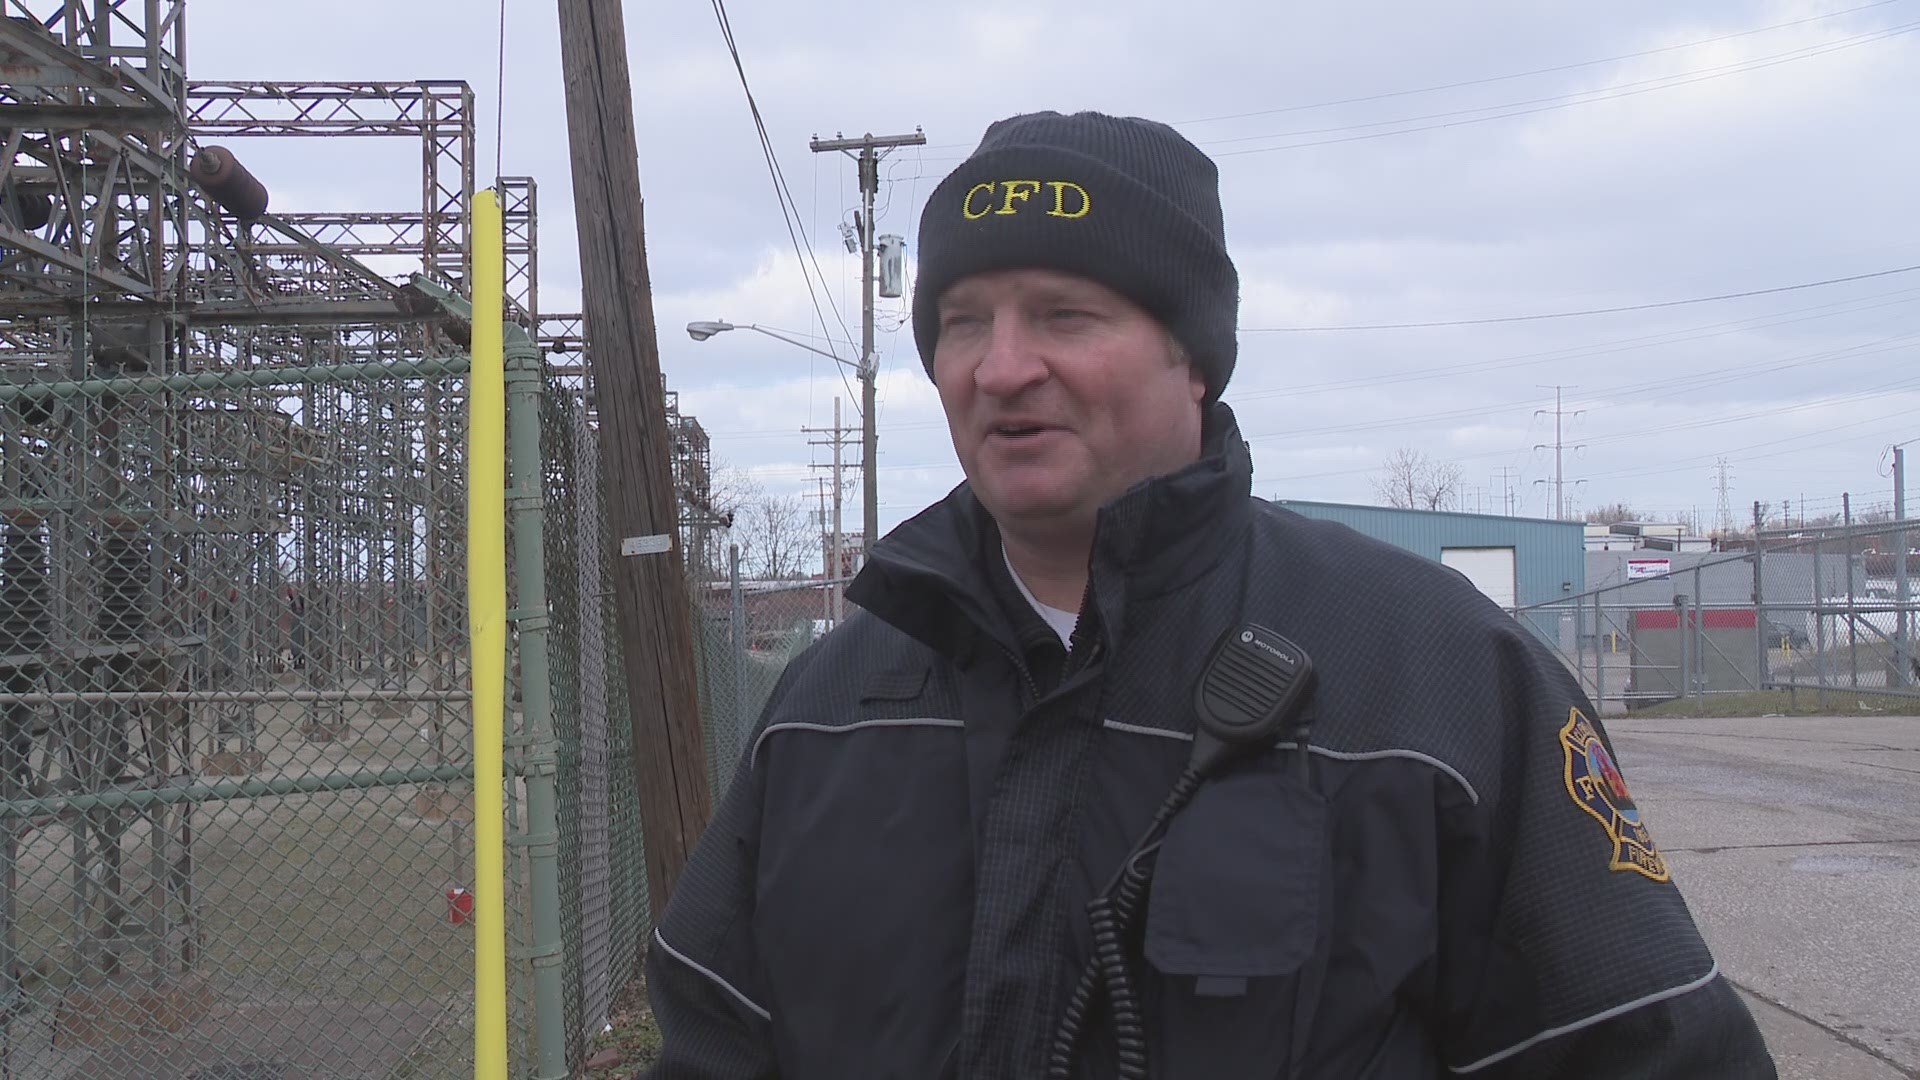 Two people are in critical condition after a hazardous materials incident at Cleveland trucking company. Lt. Mike Norman gives an update from the scene.